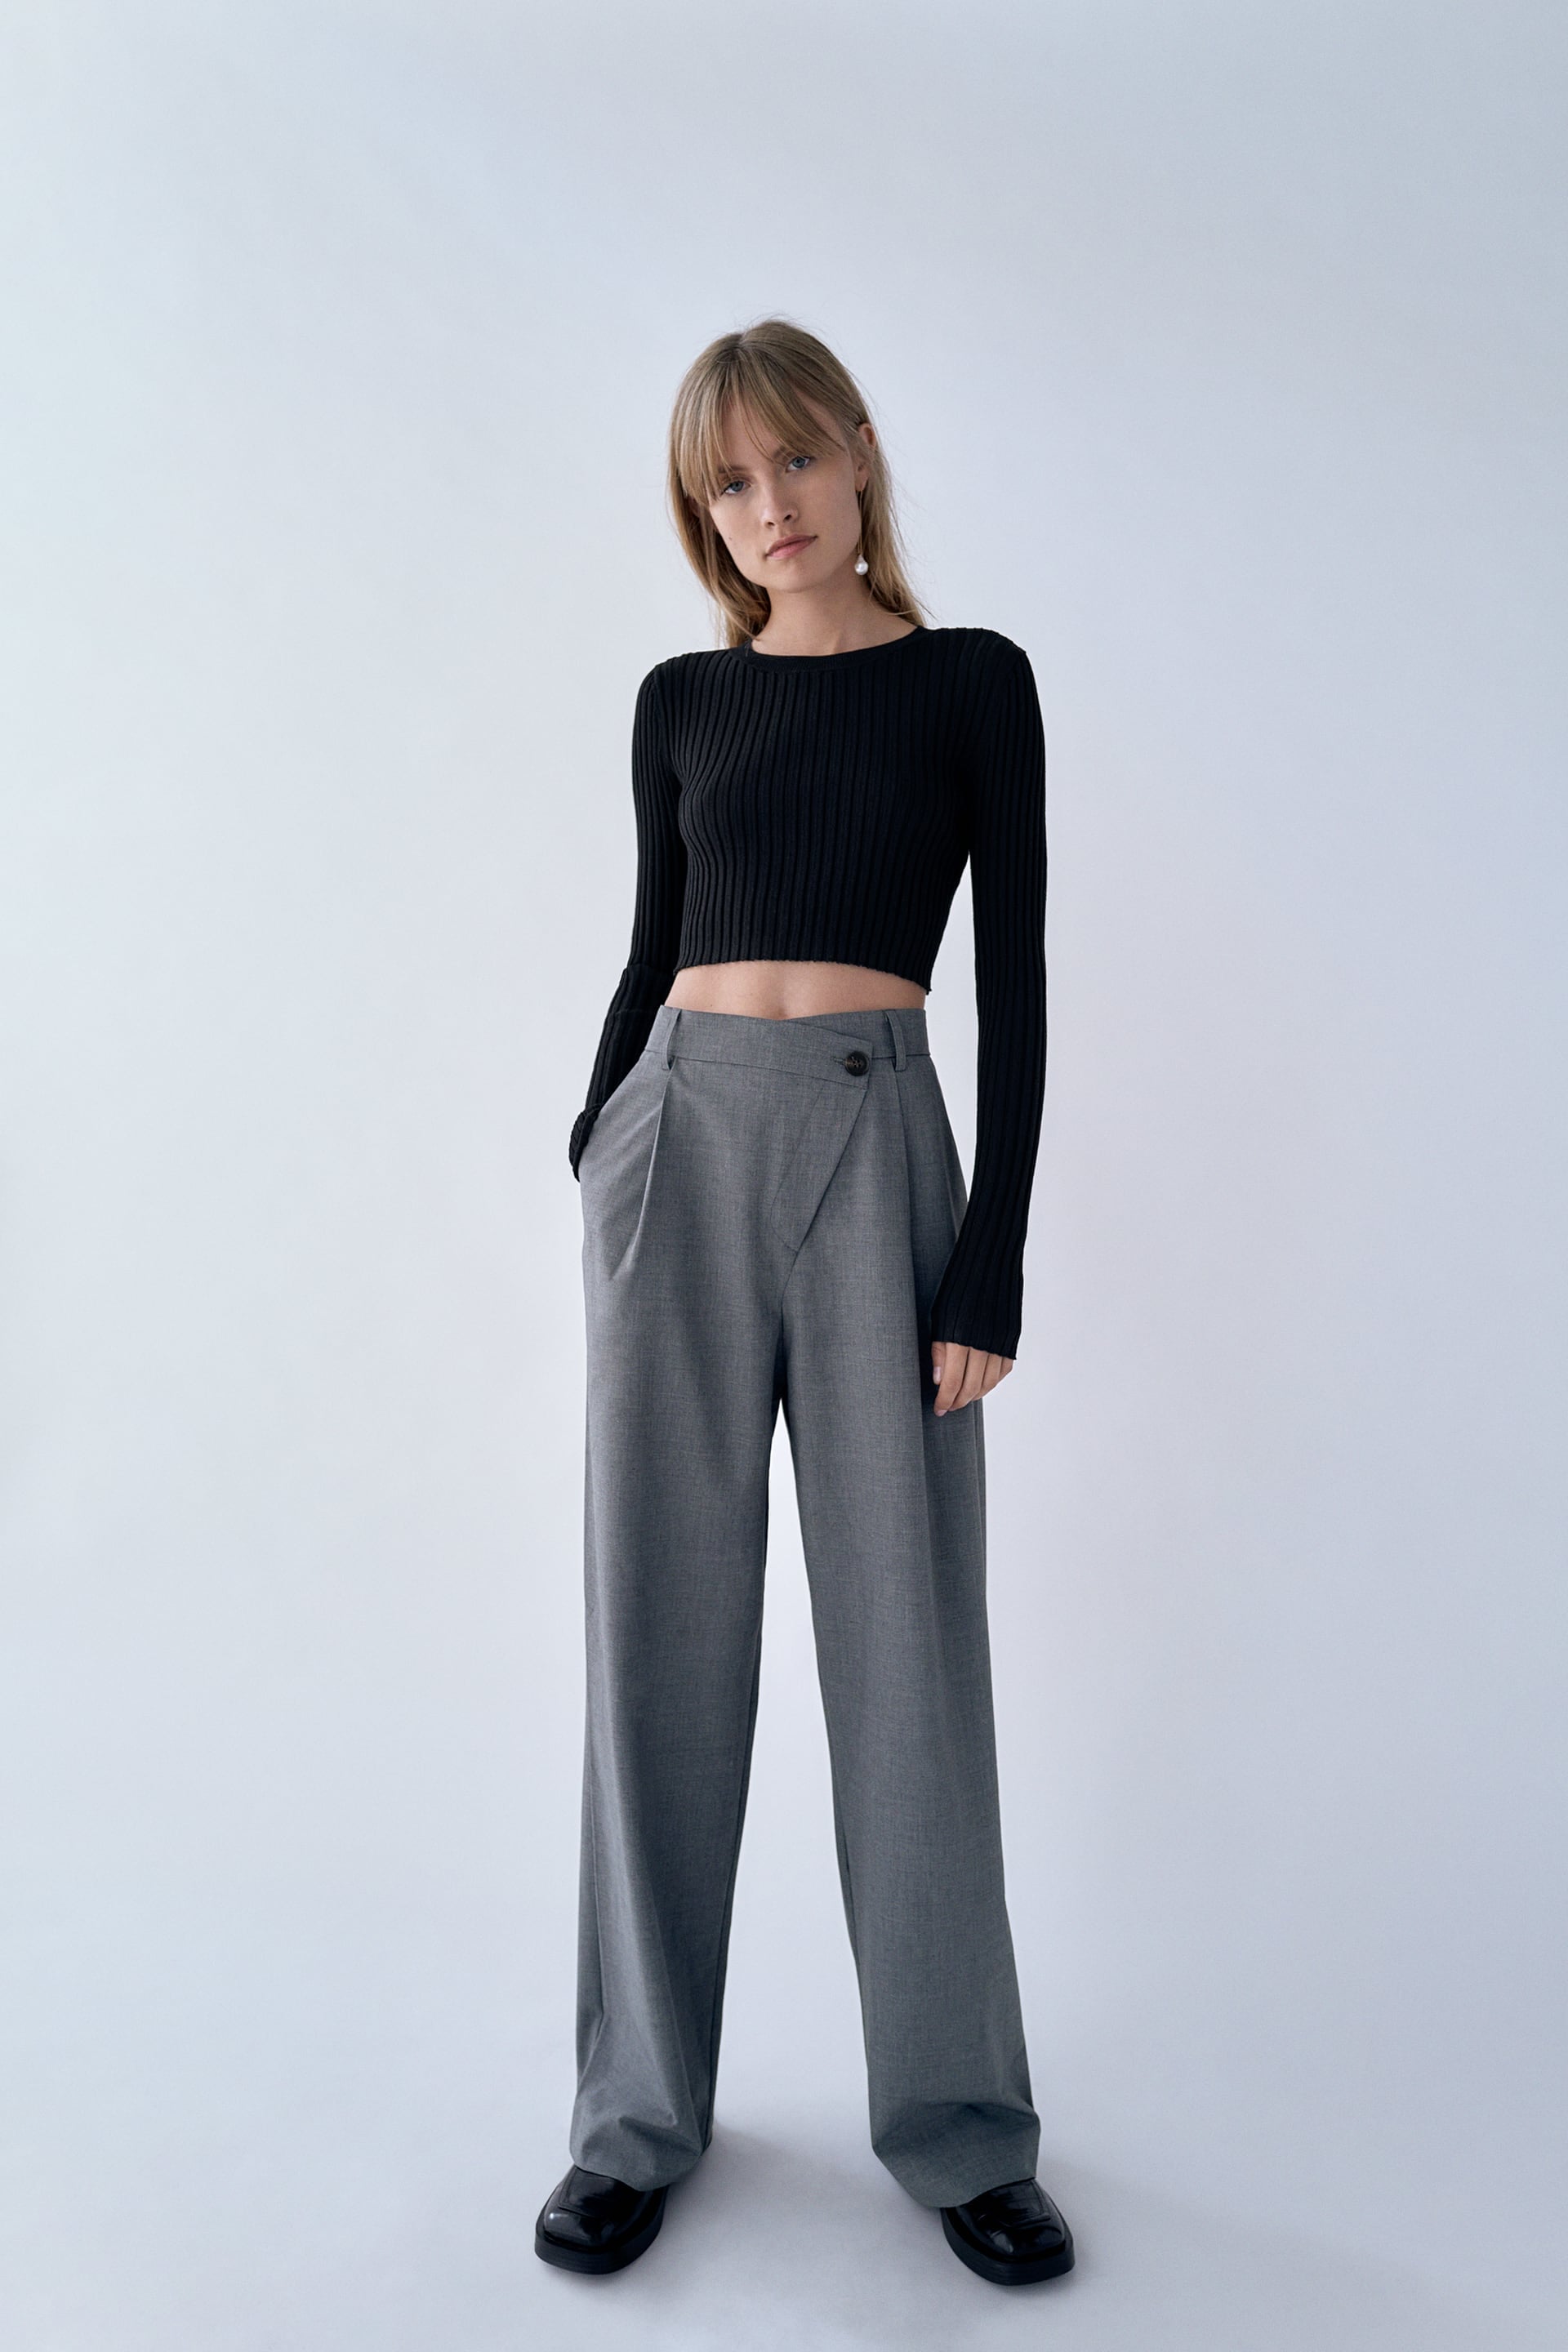 Irresistible fashion tips for zara pink culottes Crop top  Cropped Pants  Outfits Ideas  How To Wear Crop Pants  Crop Pants Outfit 